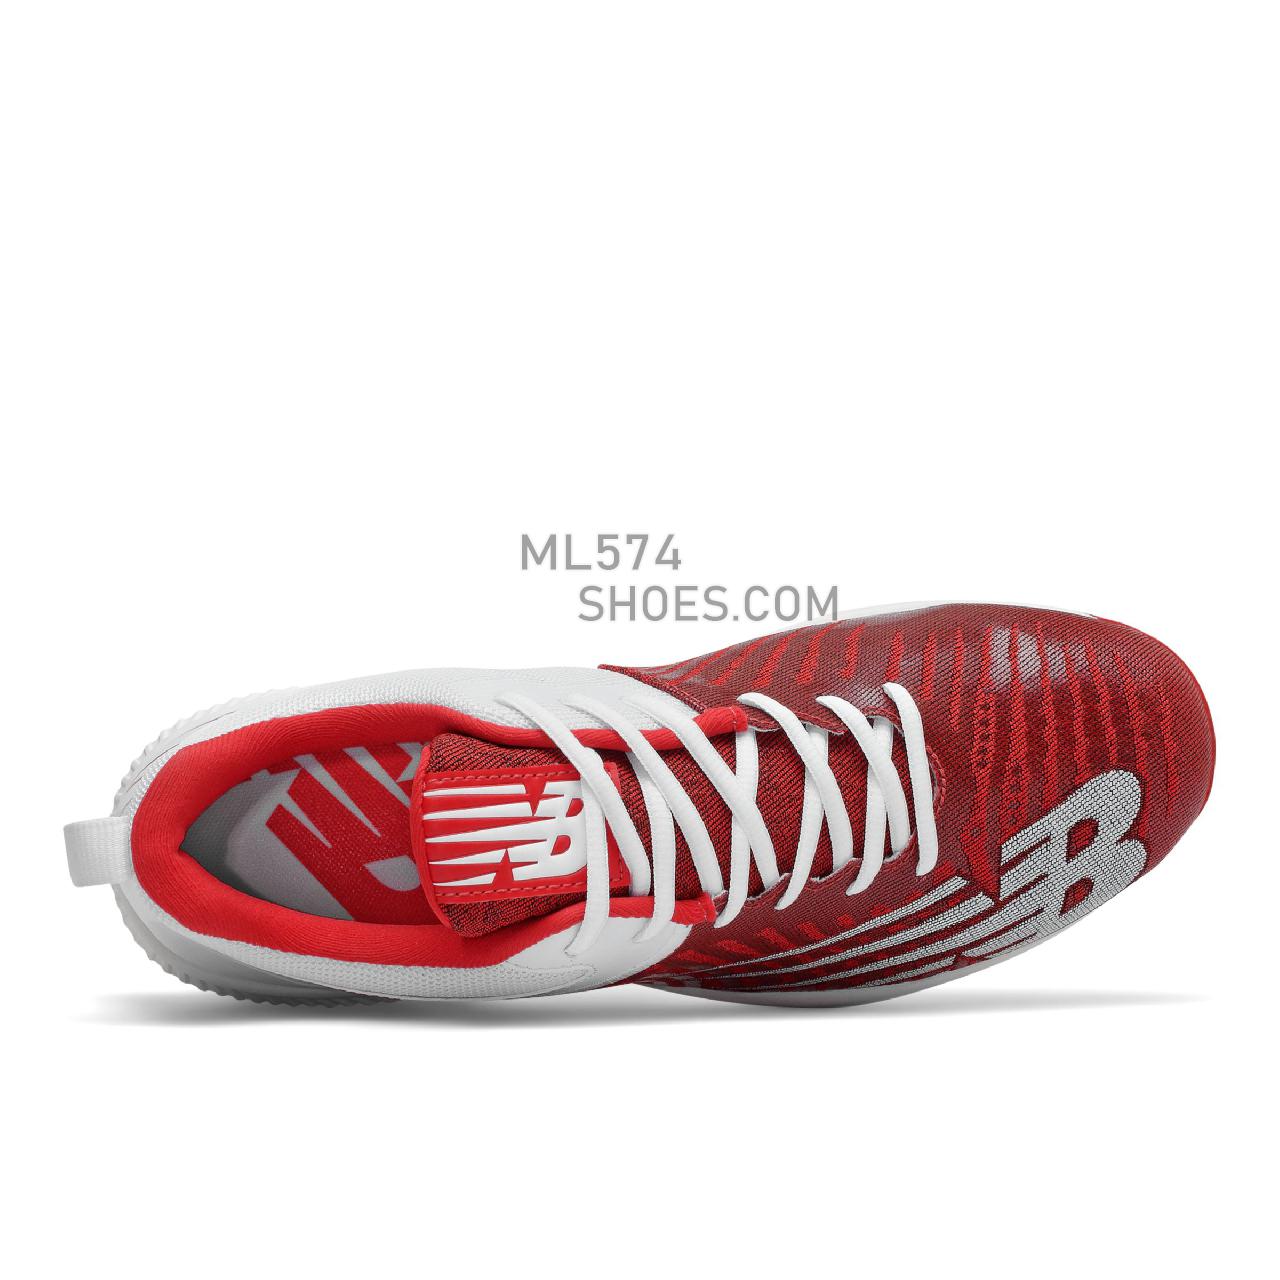 New Balance FuelCell 4040 v6 Metal - Men's Mid-Cut Baseball Cleats - Team Red with White - L4040TR6